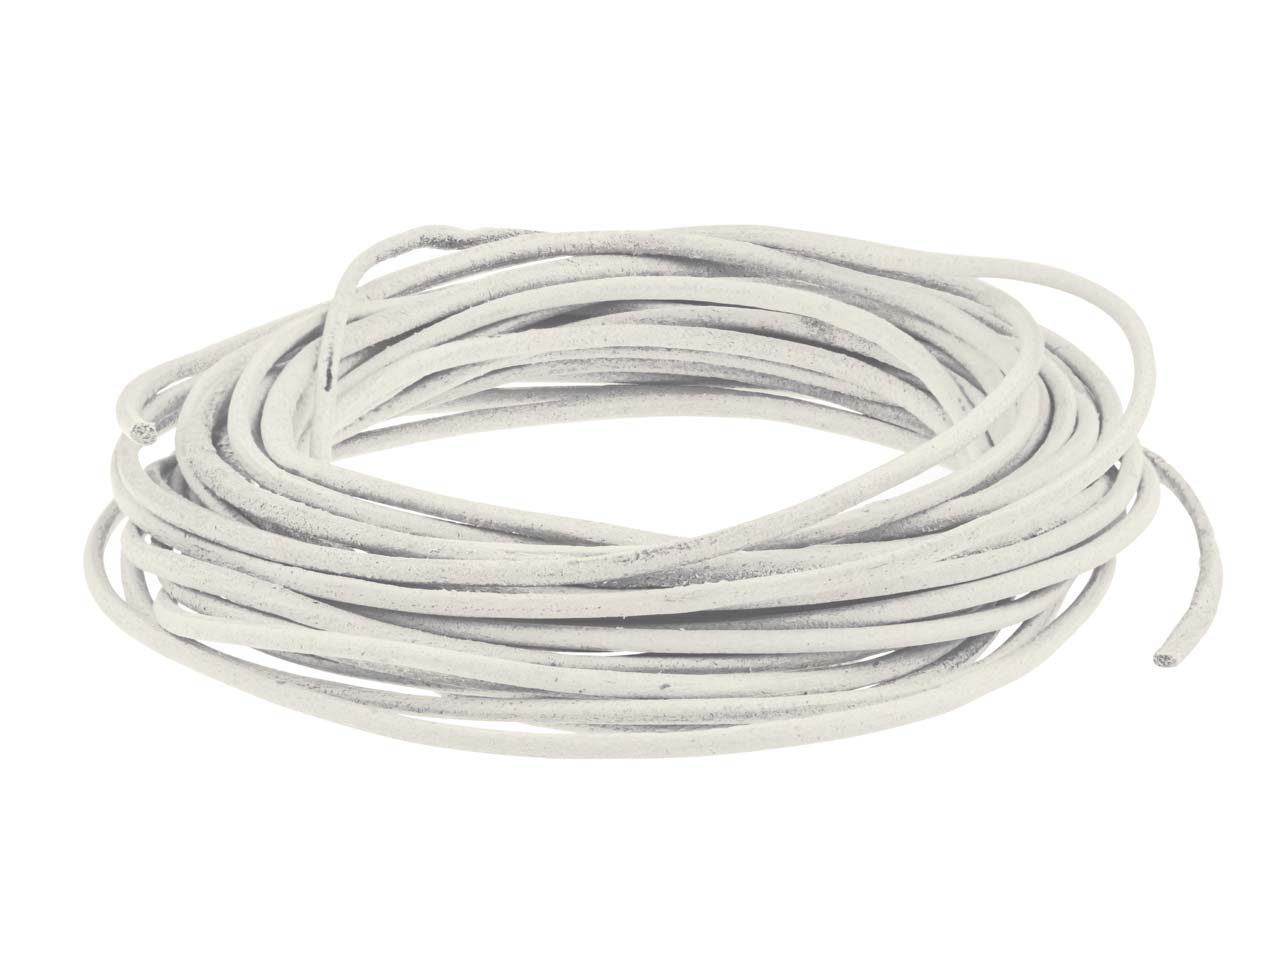 White Round Leather Cord, 2mm Diameter, 3 X 1 Metre Lengths Questions & Answers